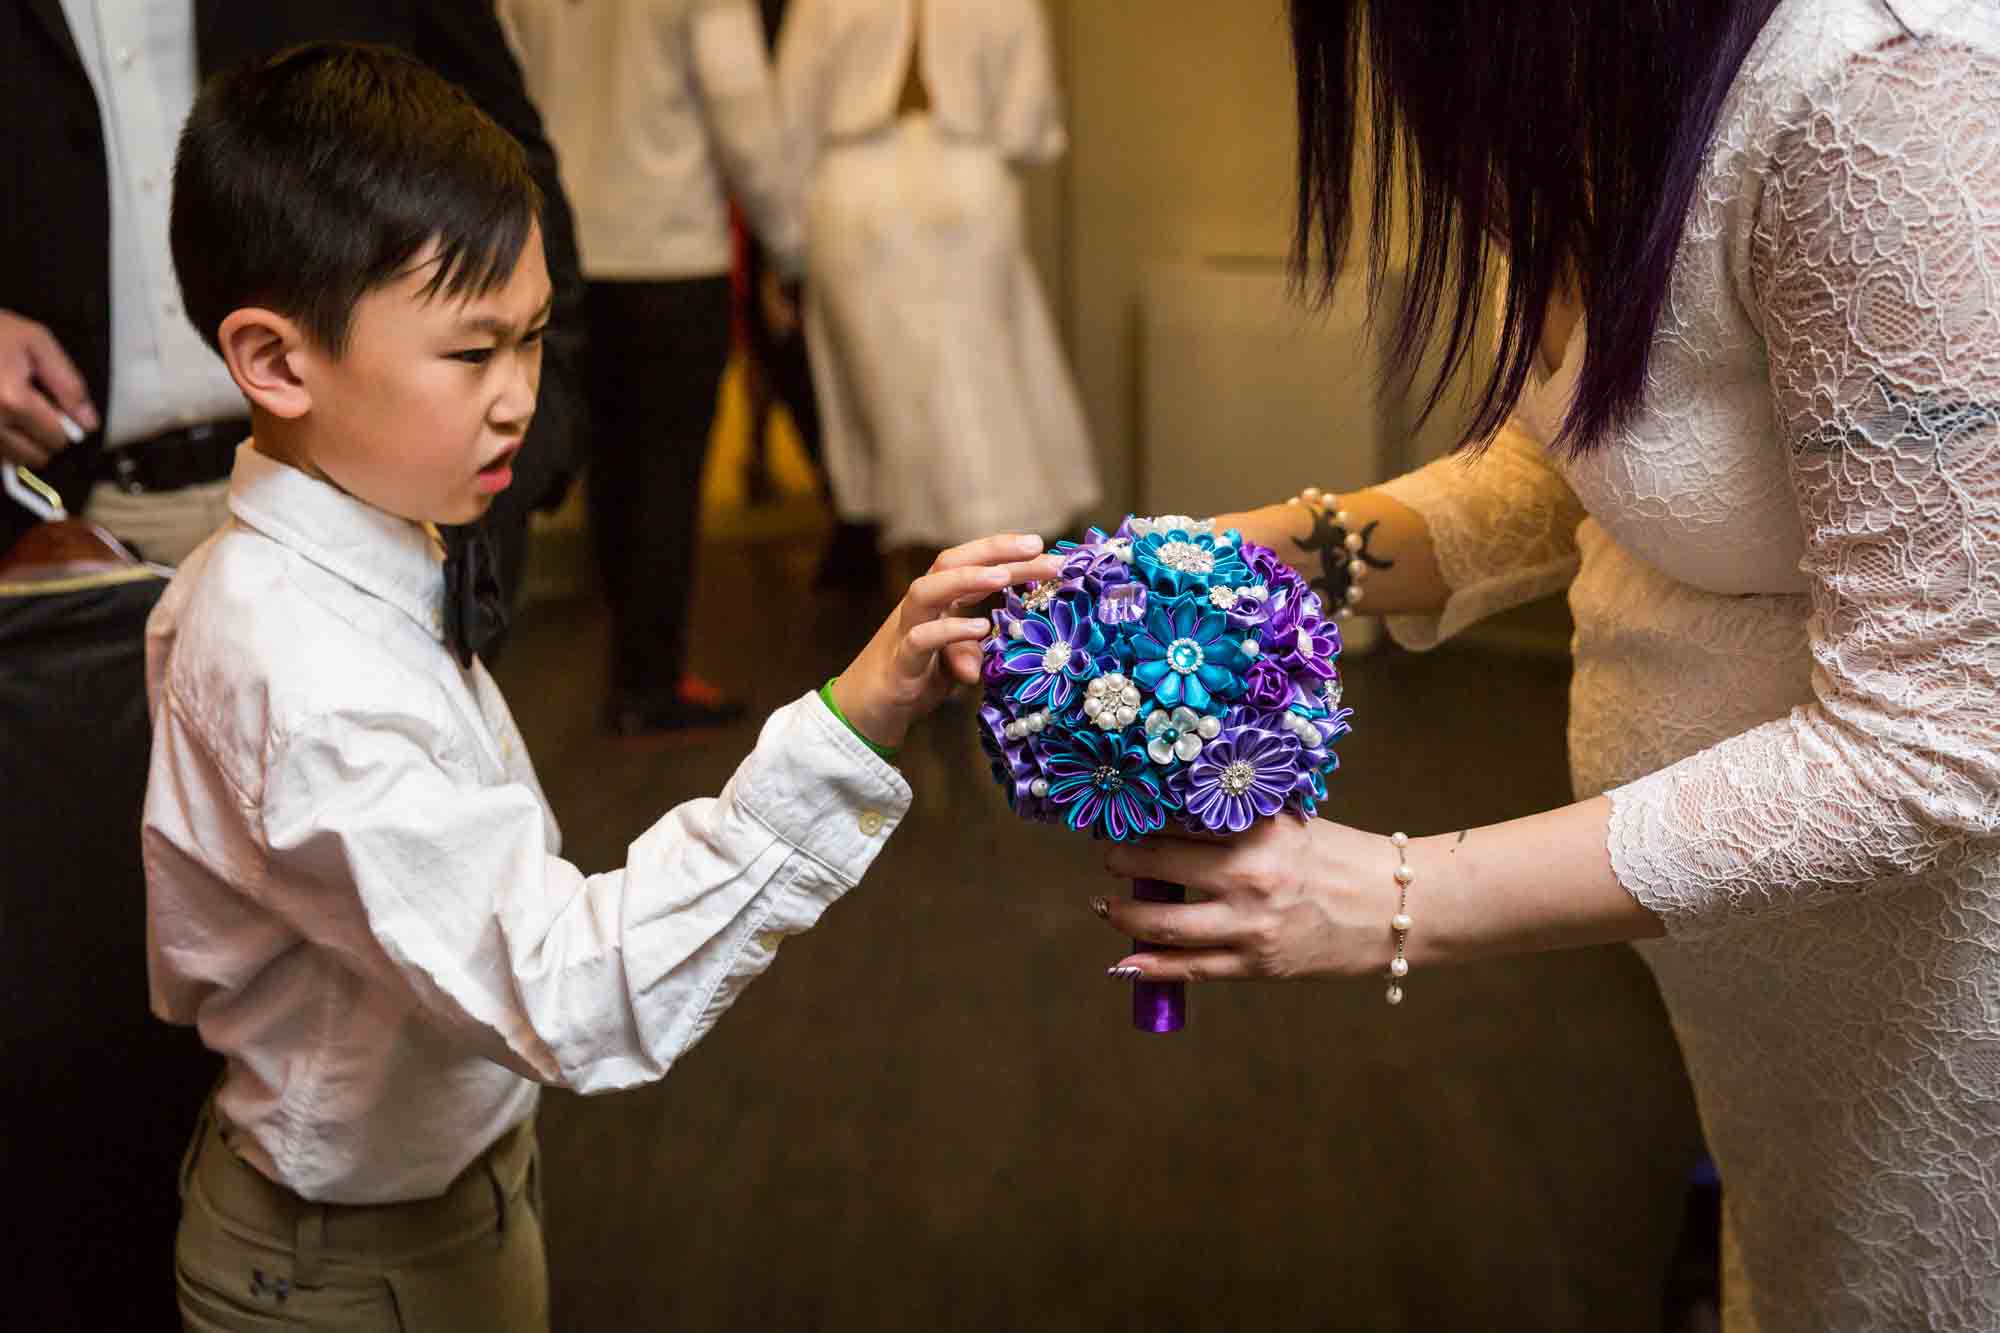 Bride holding bouquet of brooches out to young boy